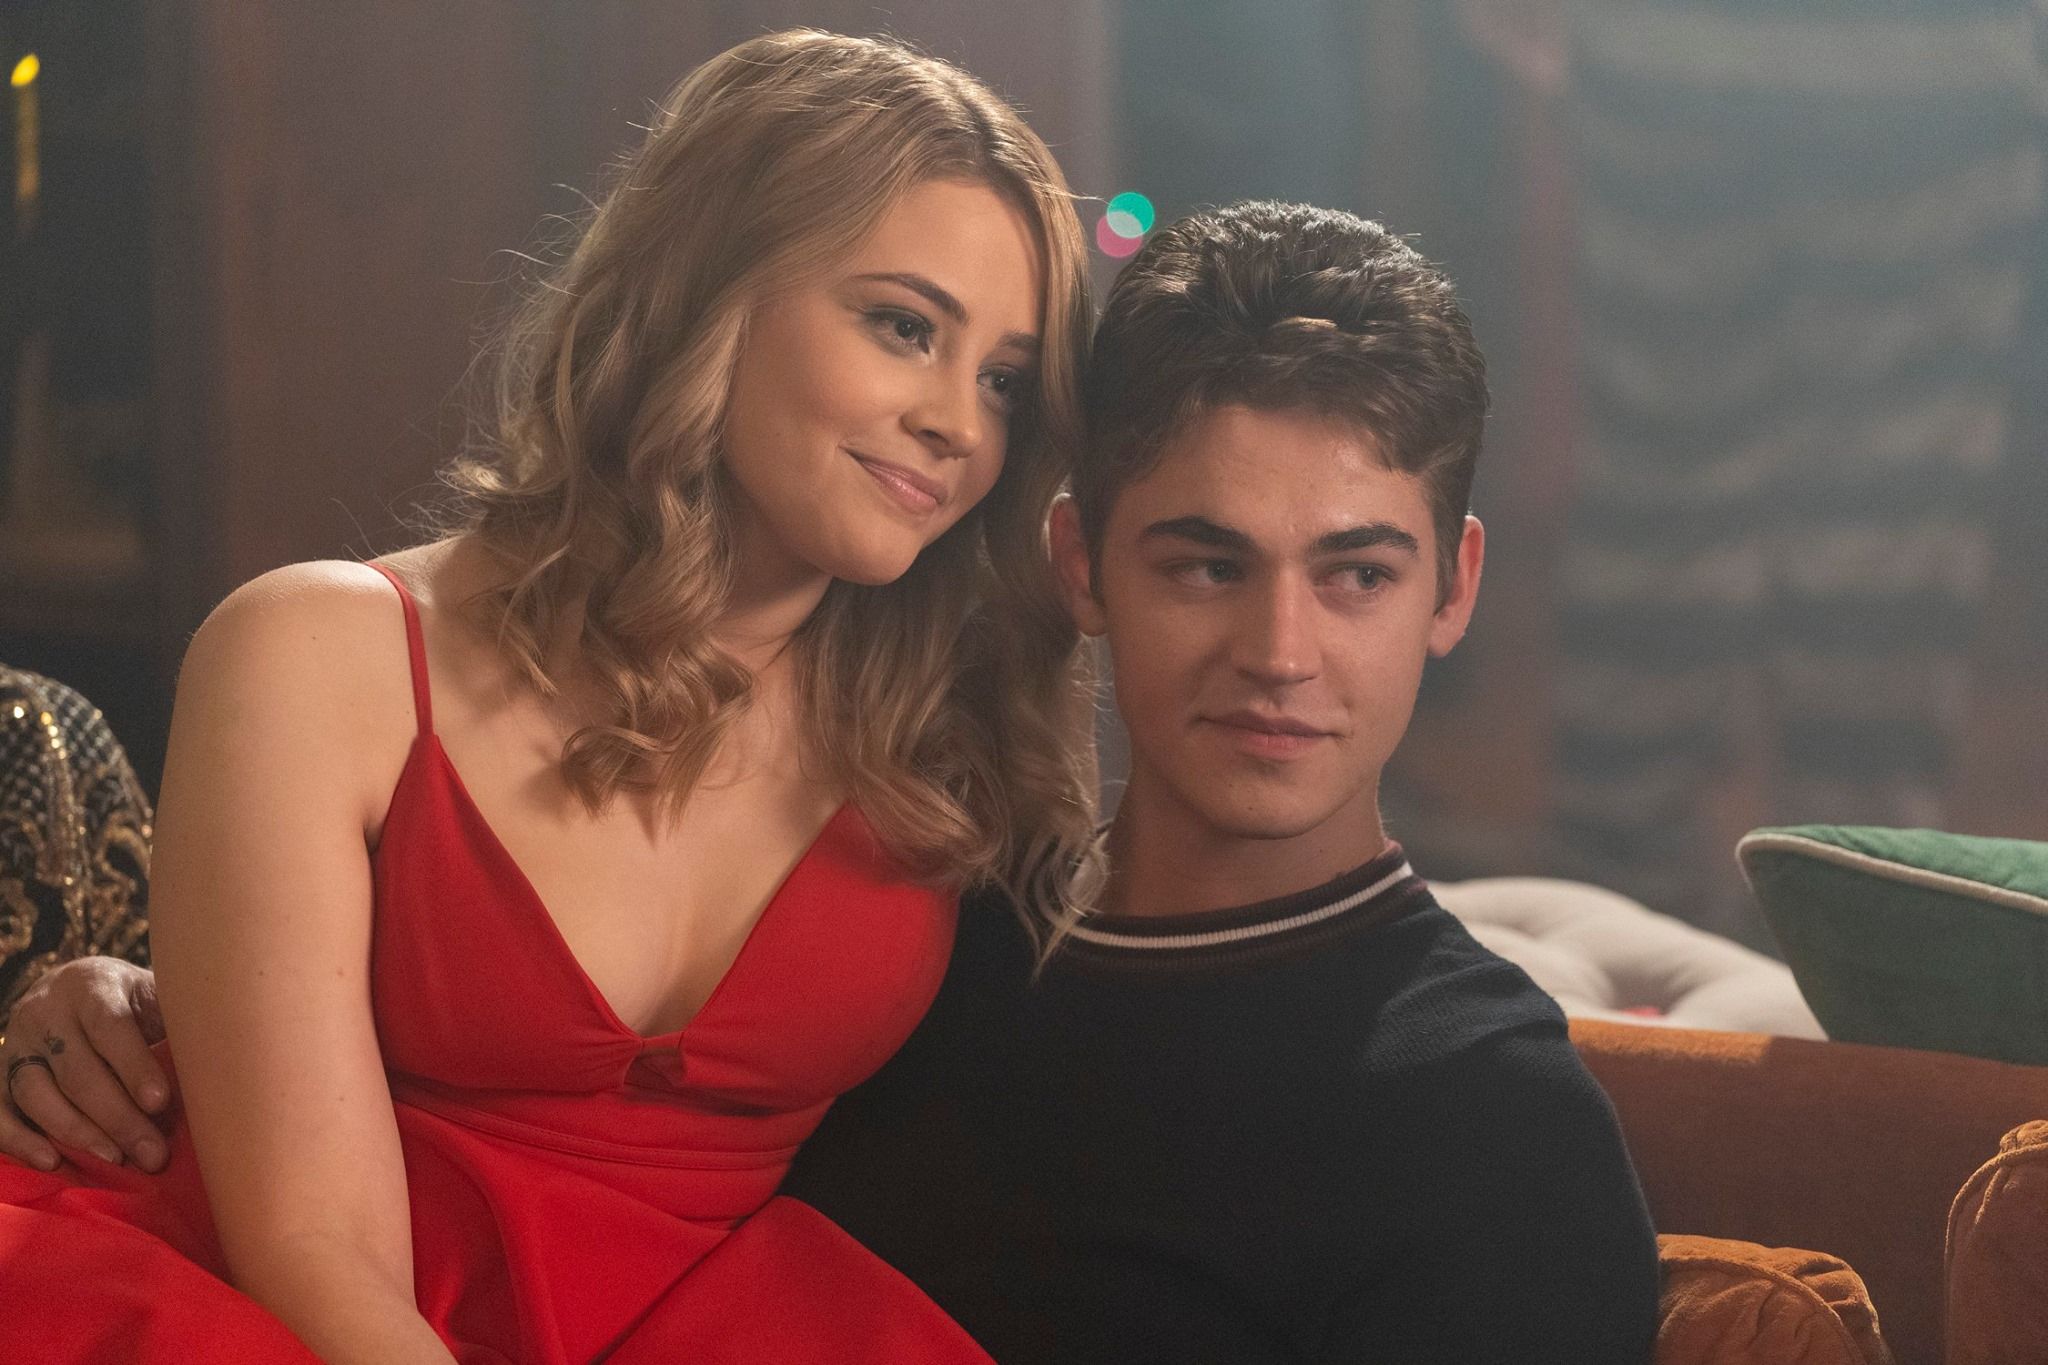 ‘After We Collided’ Stars Josephine Langford And Hero Fiennes Tiffin